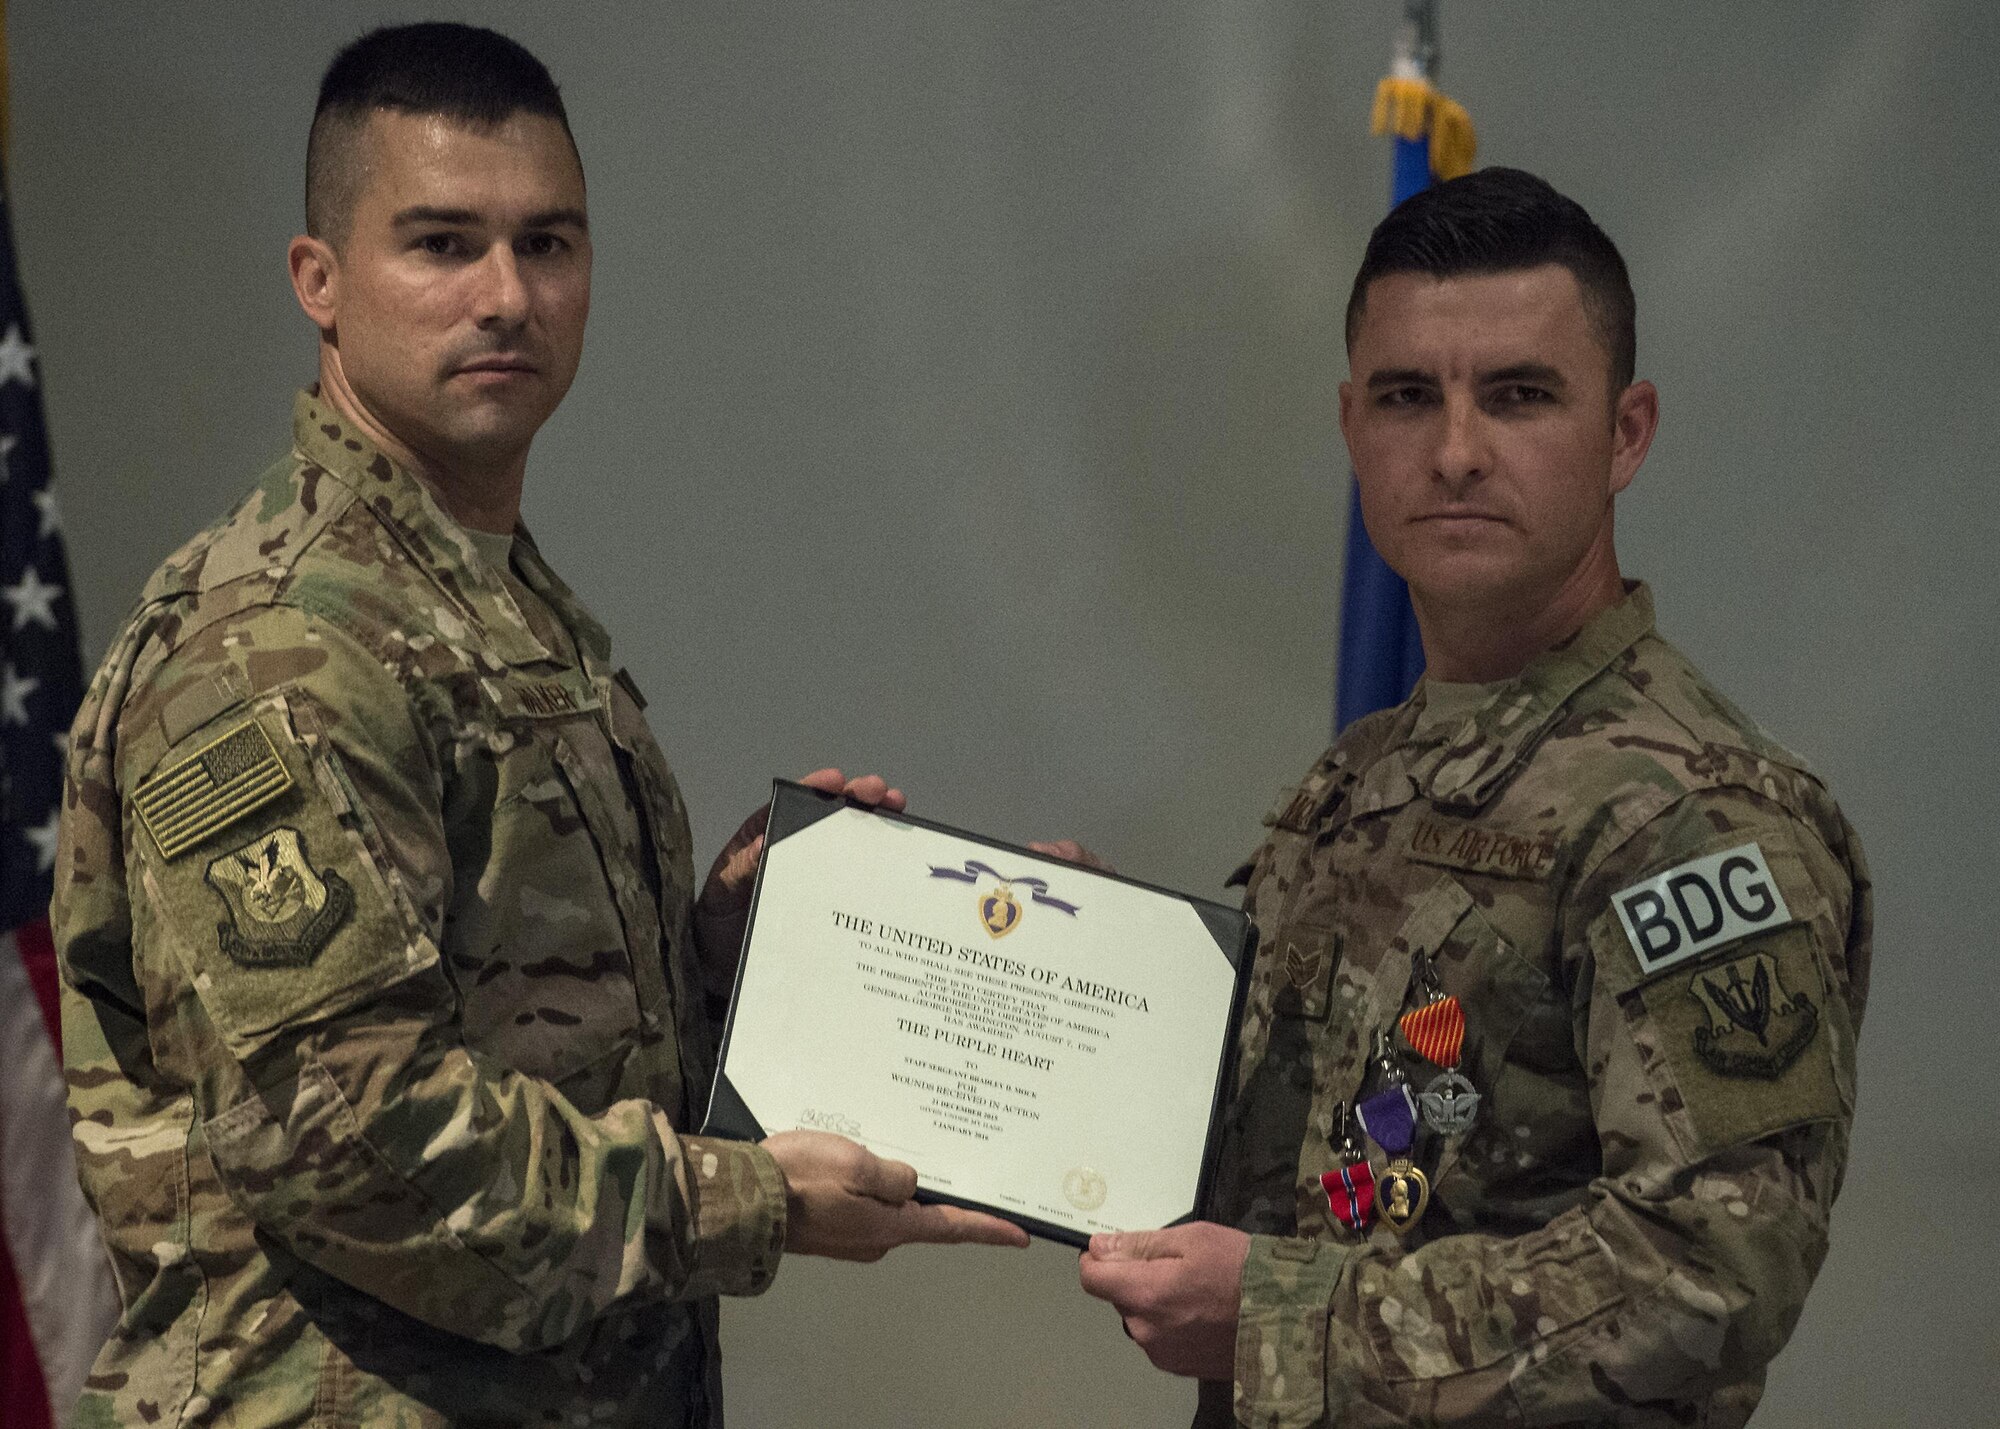 U.S. Air Force Col. Kevin Walker, left, 820th Base Defense Group commander, presents a Purple Heart certificate to Staff Sgt. Bradley Mock, 824 Base Defense Squadron superintendent of supply, during a medallion ceremony, July 8, 2016, at Moody Air Force Base, Ga. One of the medals Mock received was the Purple Heart, which is awarded for wounds or death as result of an act of any opposing armed force, international terrorist attack or as a result of military operations while serving as part of a peacekeeping force. (U.S. Air Force photo by Airman 1st Class Janiqua P. Robinson/Released)